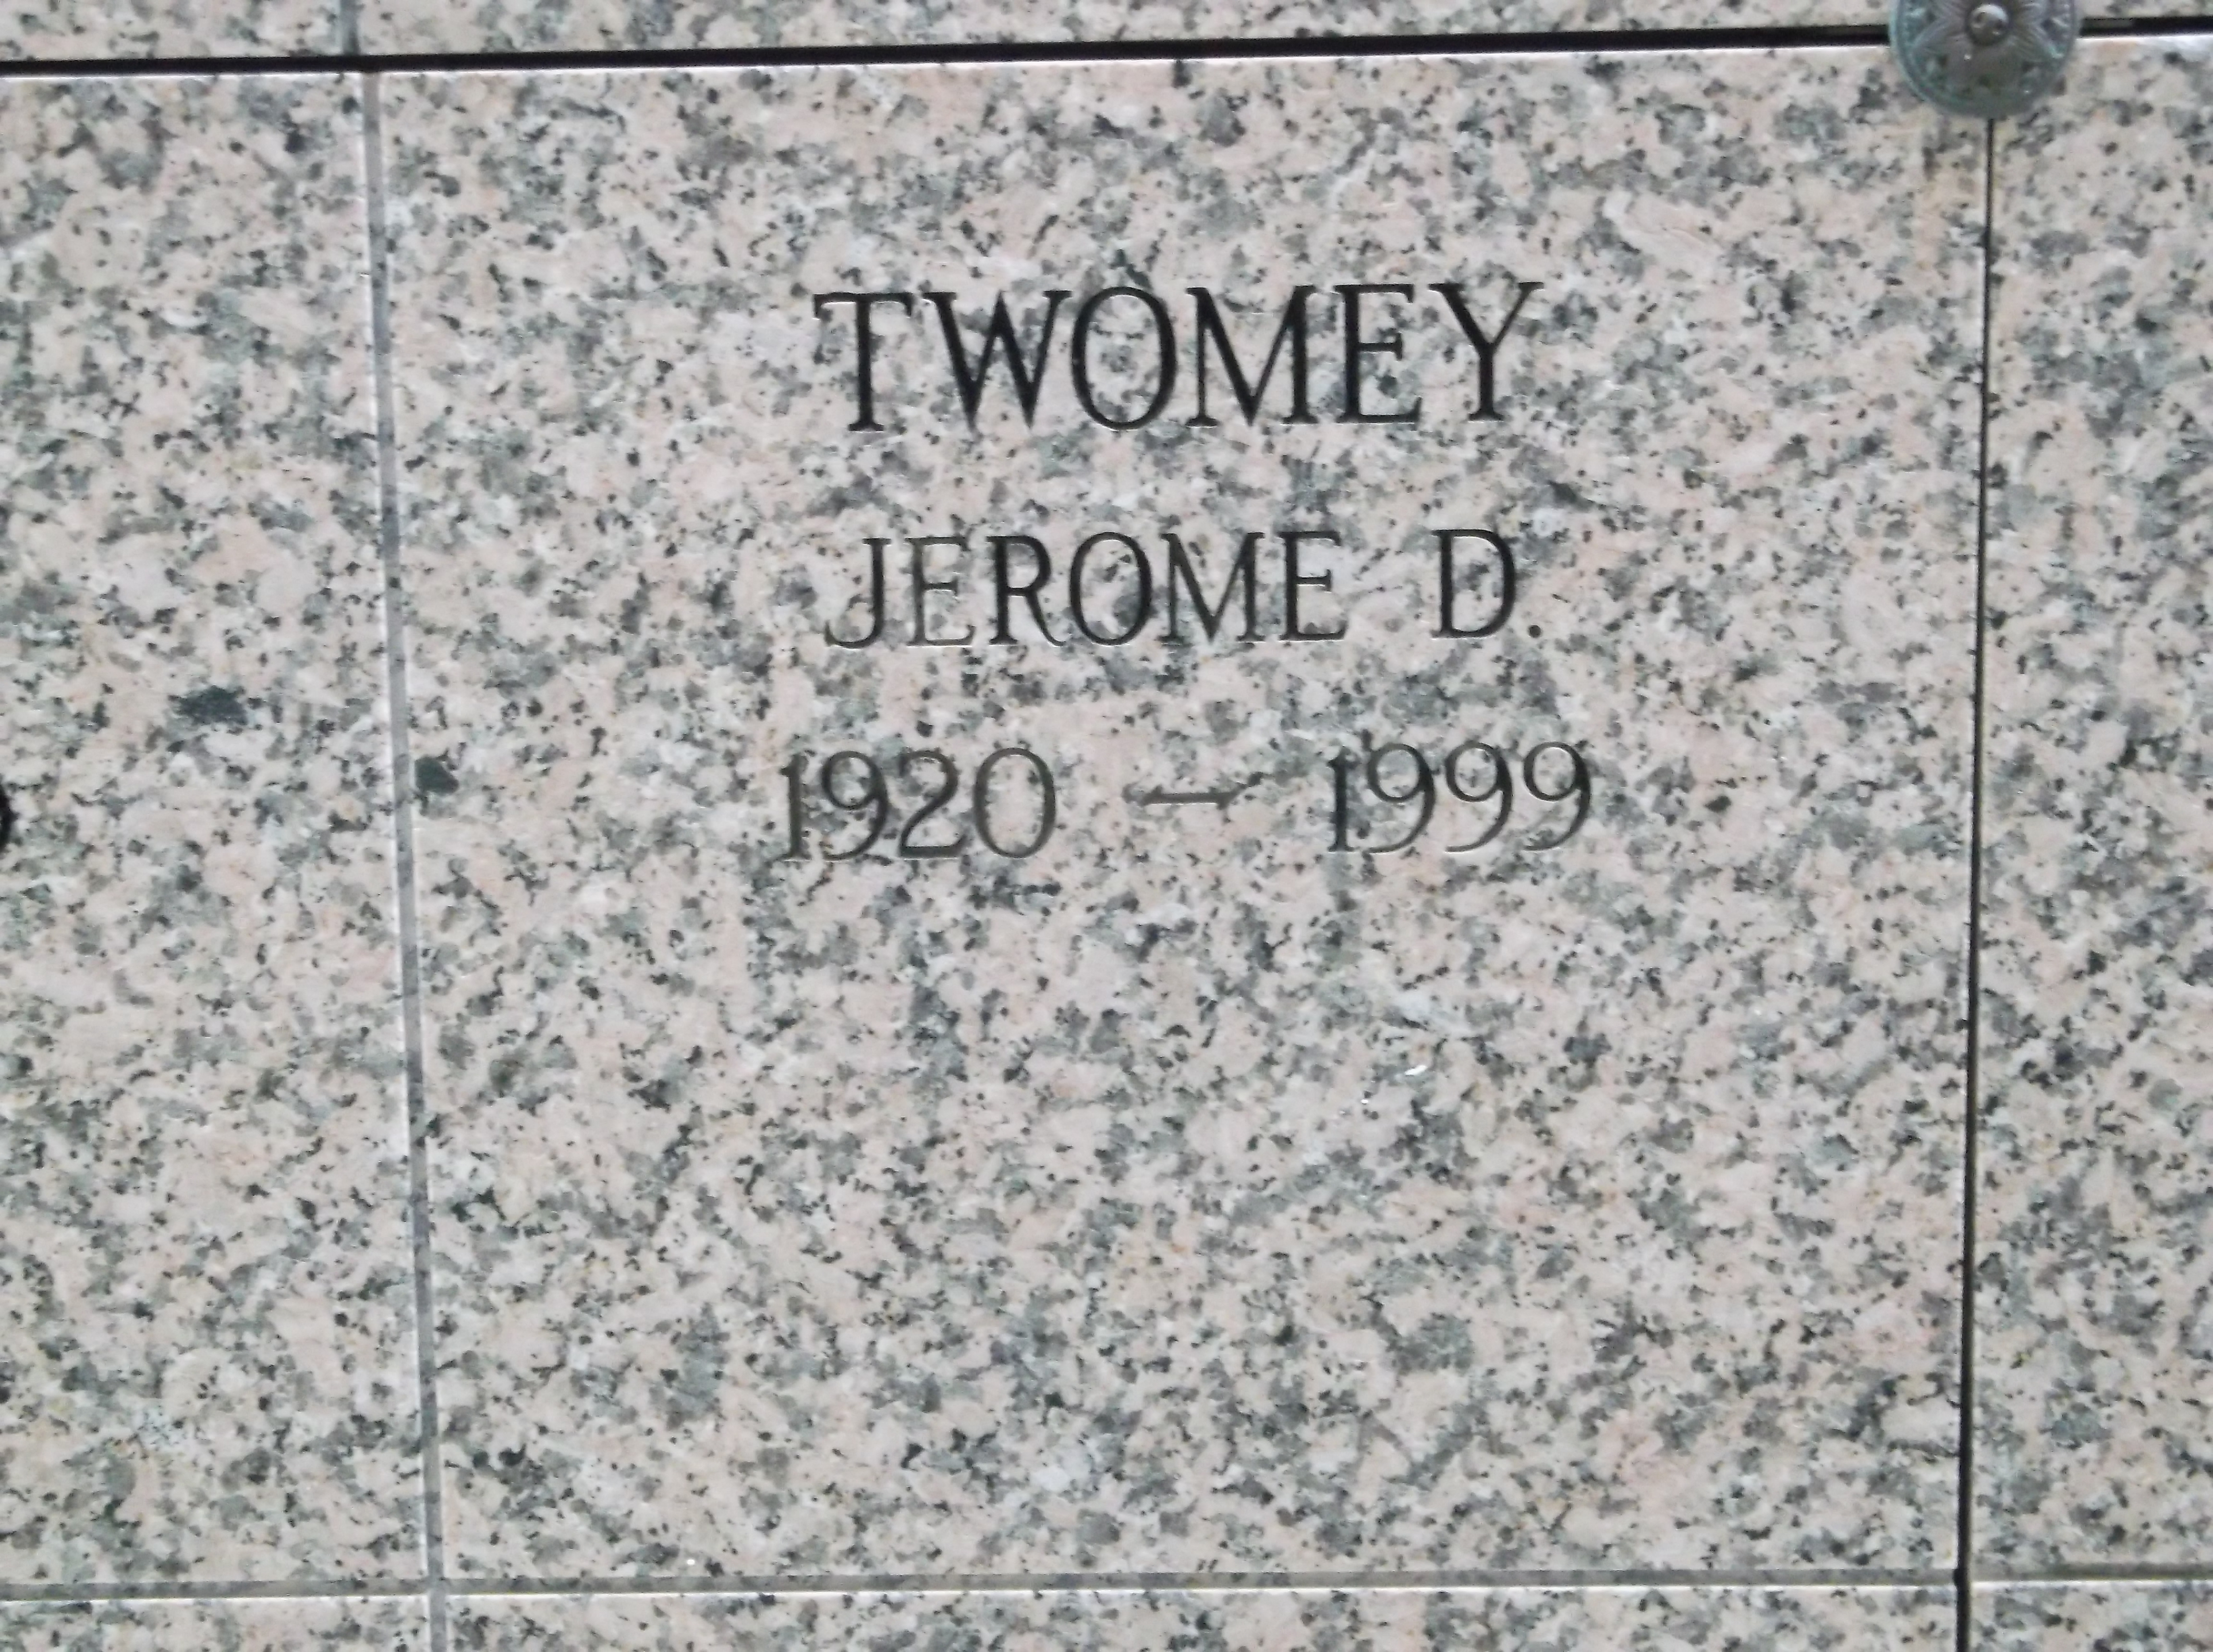 Jerome D Twomey